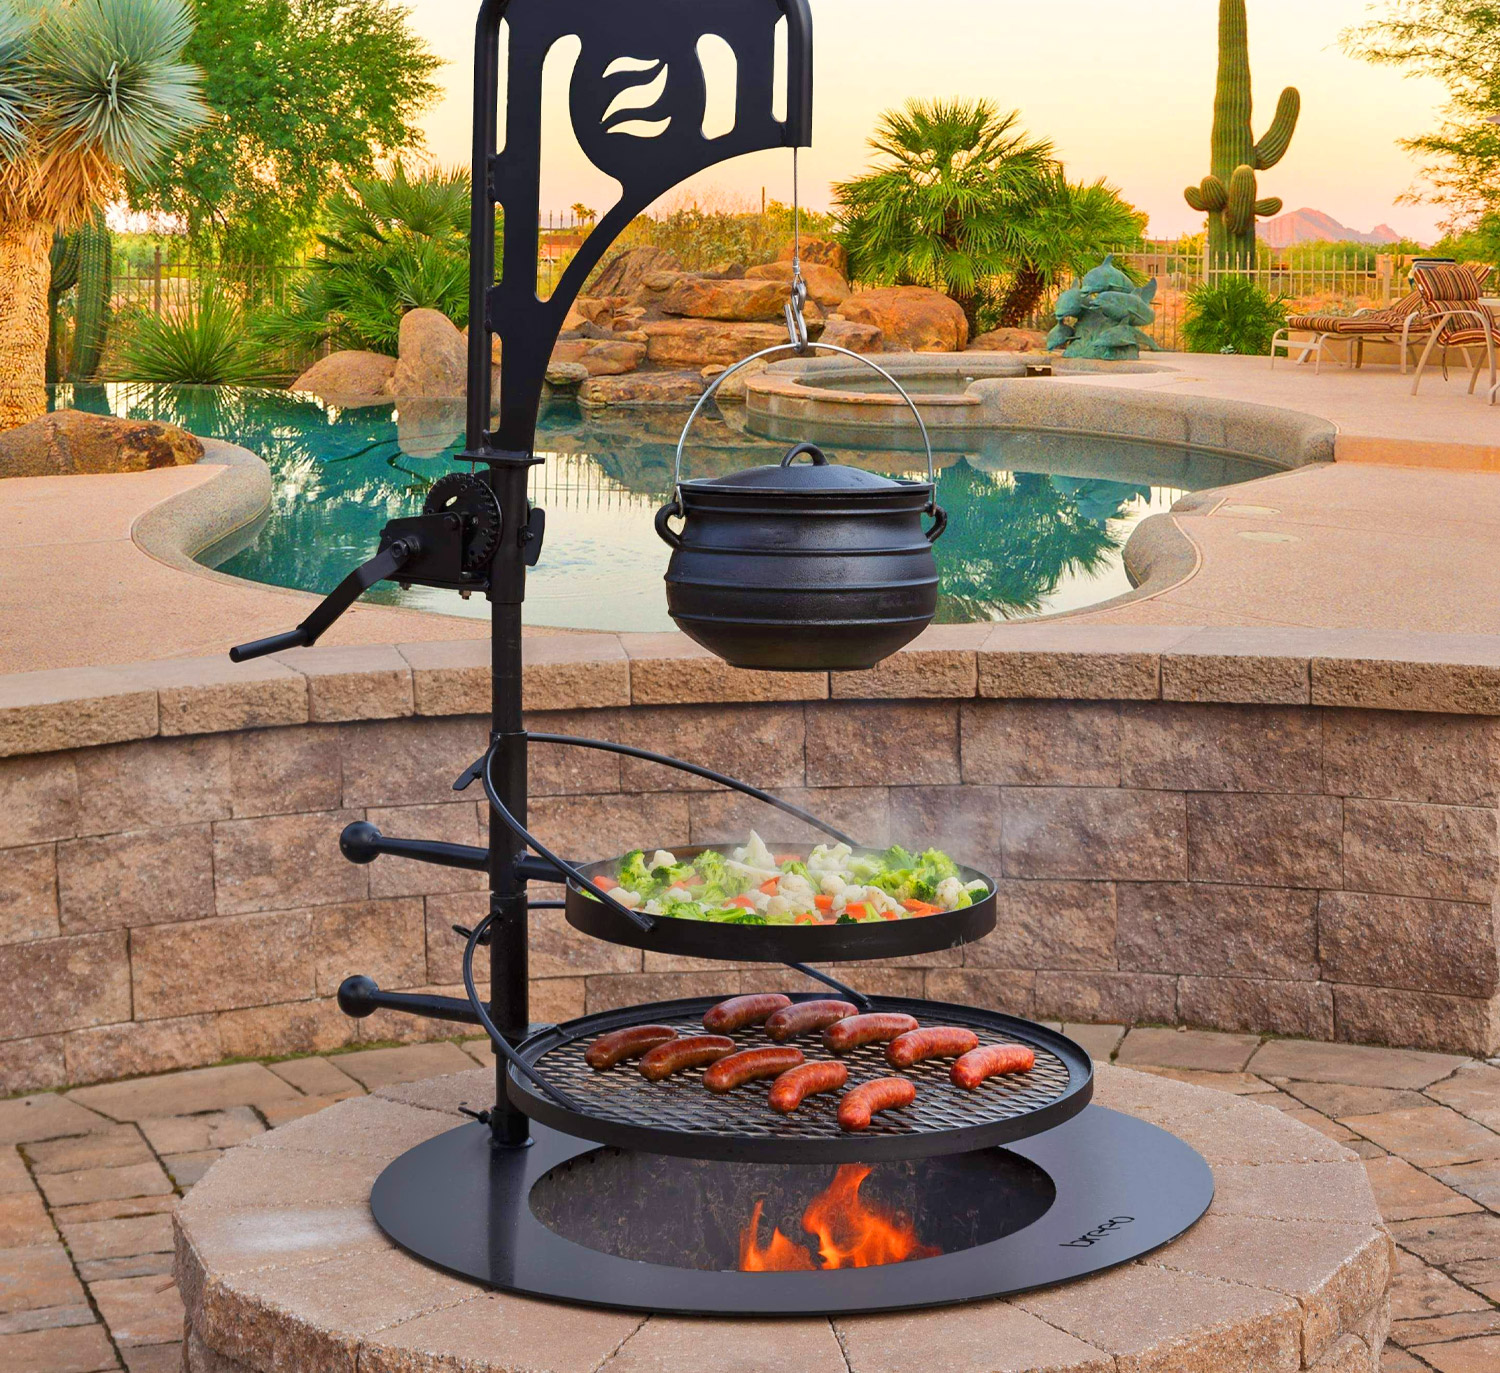 Fire Pit Into A Tiered Cooking Machine, Fire Pit Cooking Pot